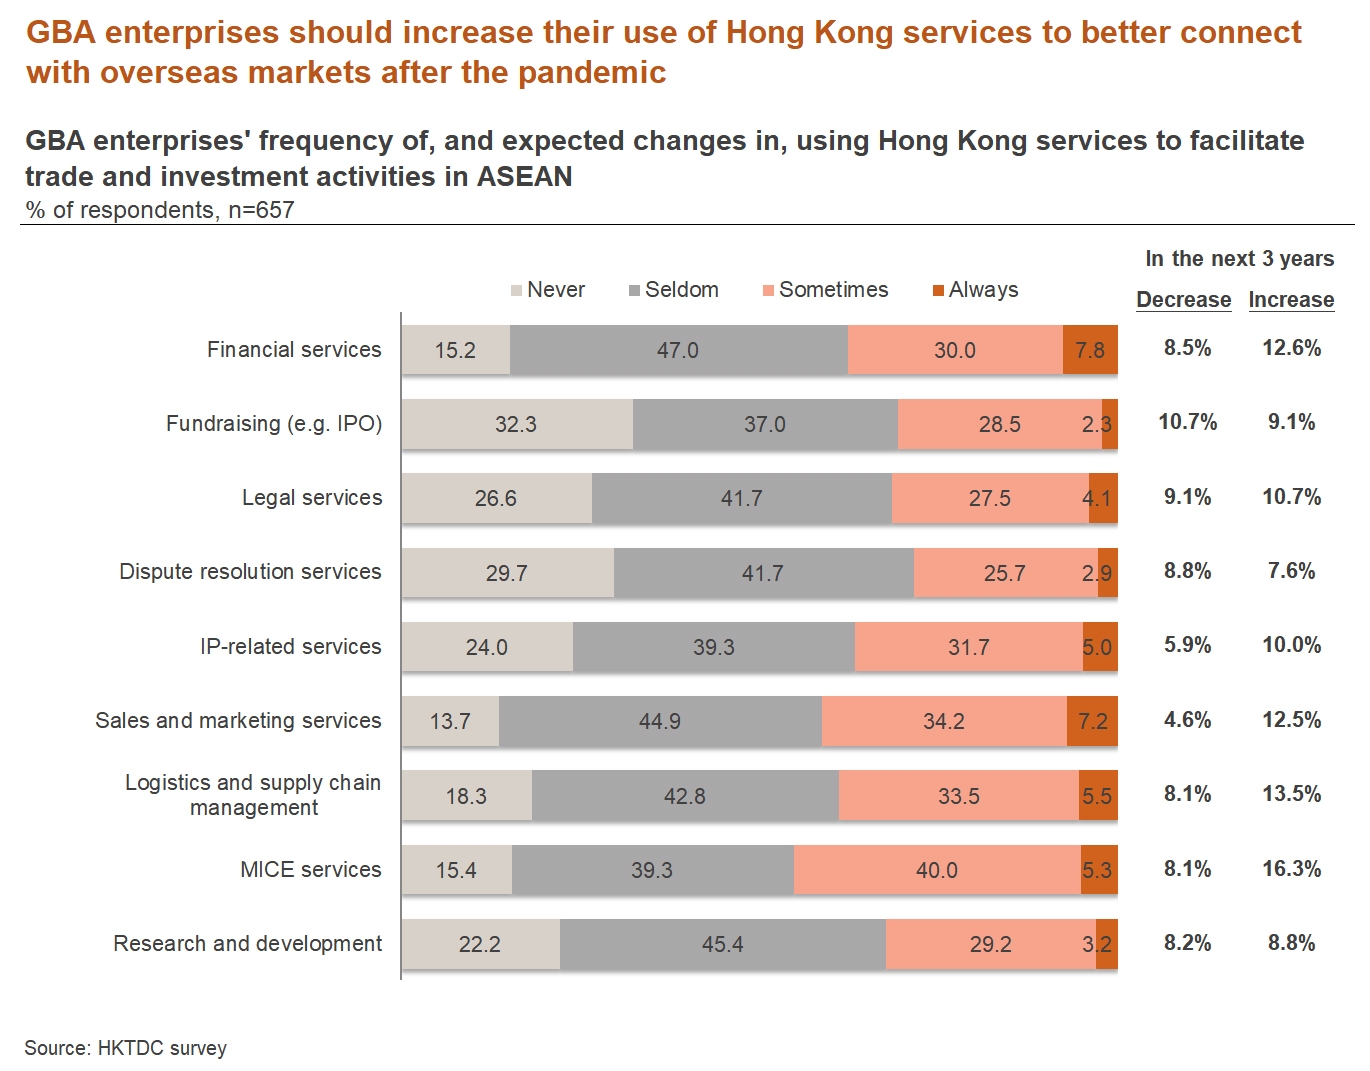 Chart: GBA enterprises' frequency of, and expected changes in, using Hong Kong services to facilitate trade and investment activities in ASEAN